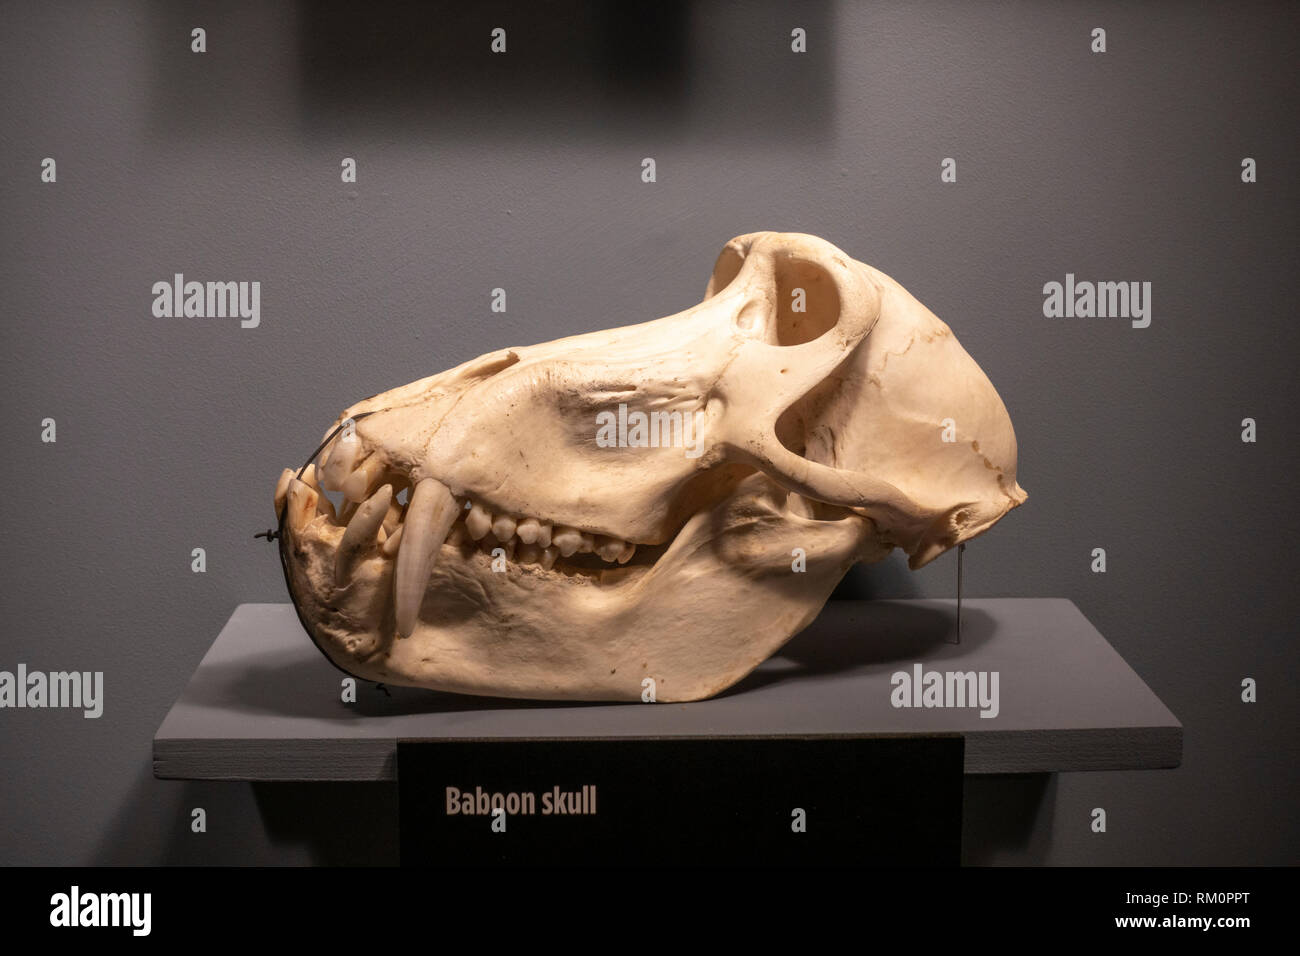 A baboon skull, part of the illegal wildlife trade carried out by the Mob, The Mob Museum, Las Vegas, Nevada, United States. Stock Photo